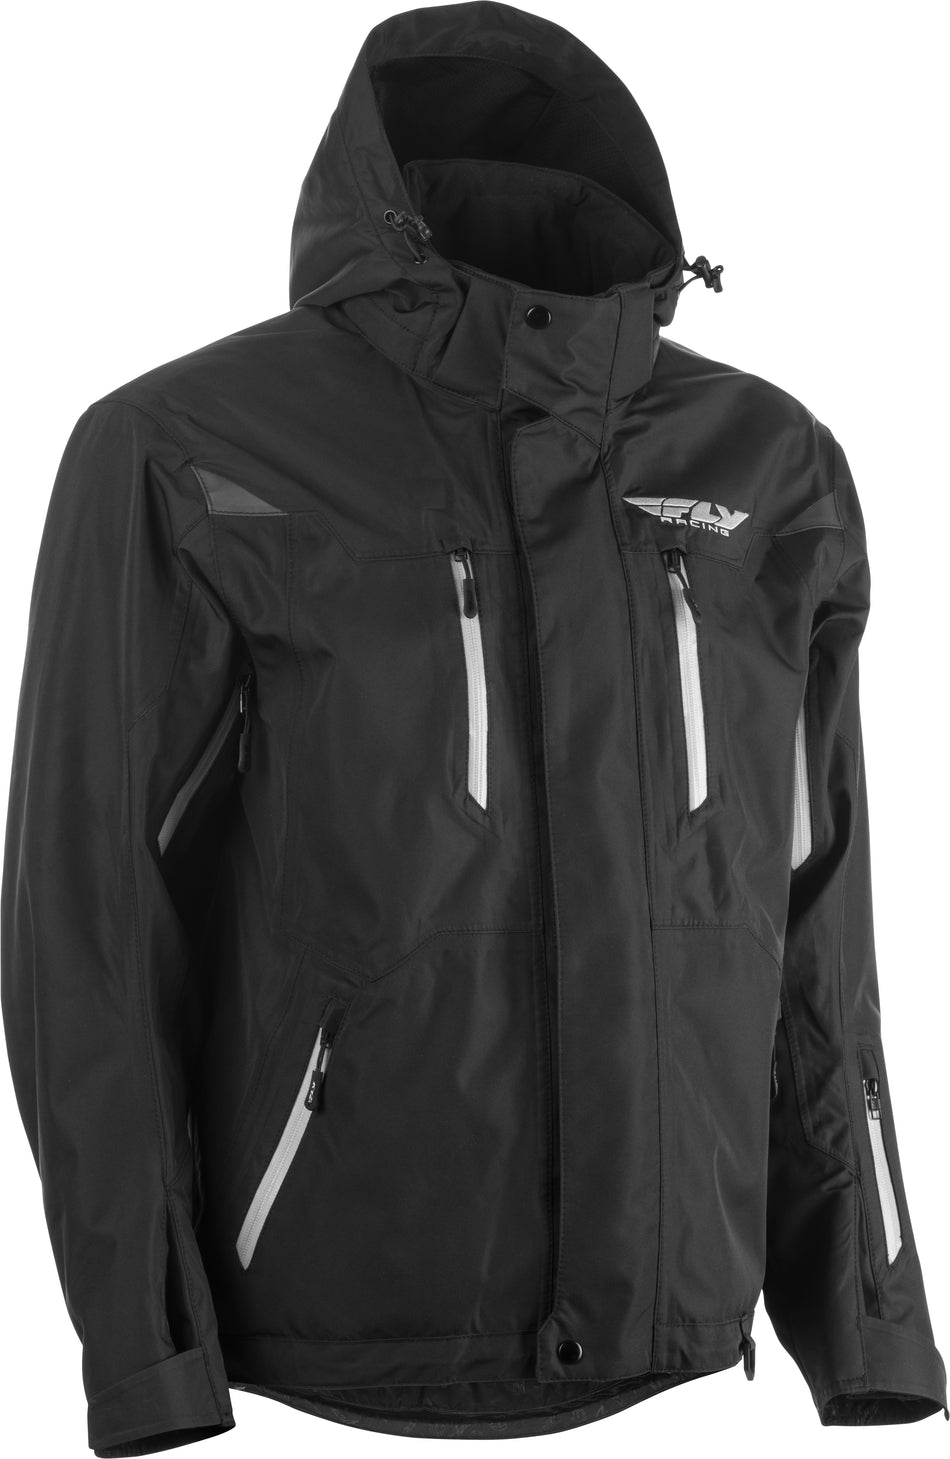 FLY RACING Fly Incline Jacket Black 4x 470-41004X